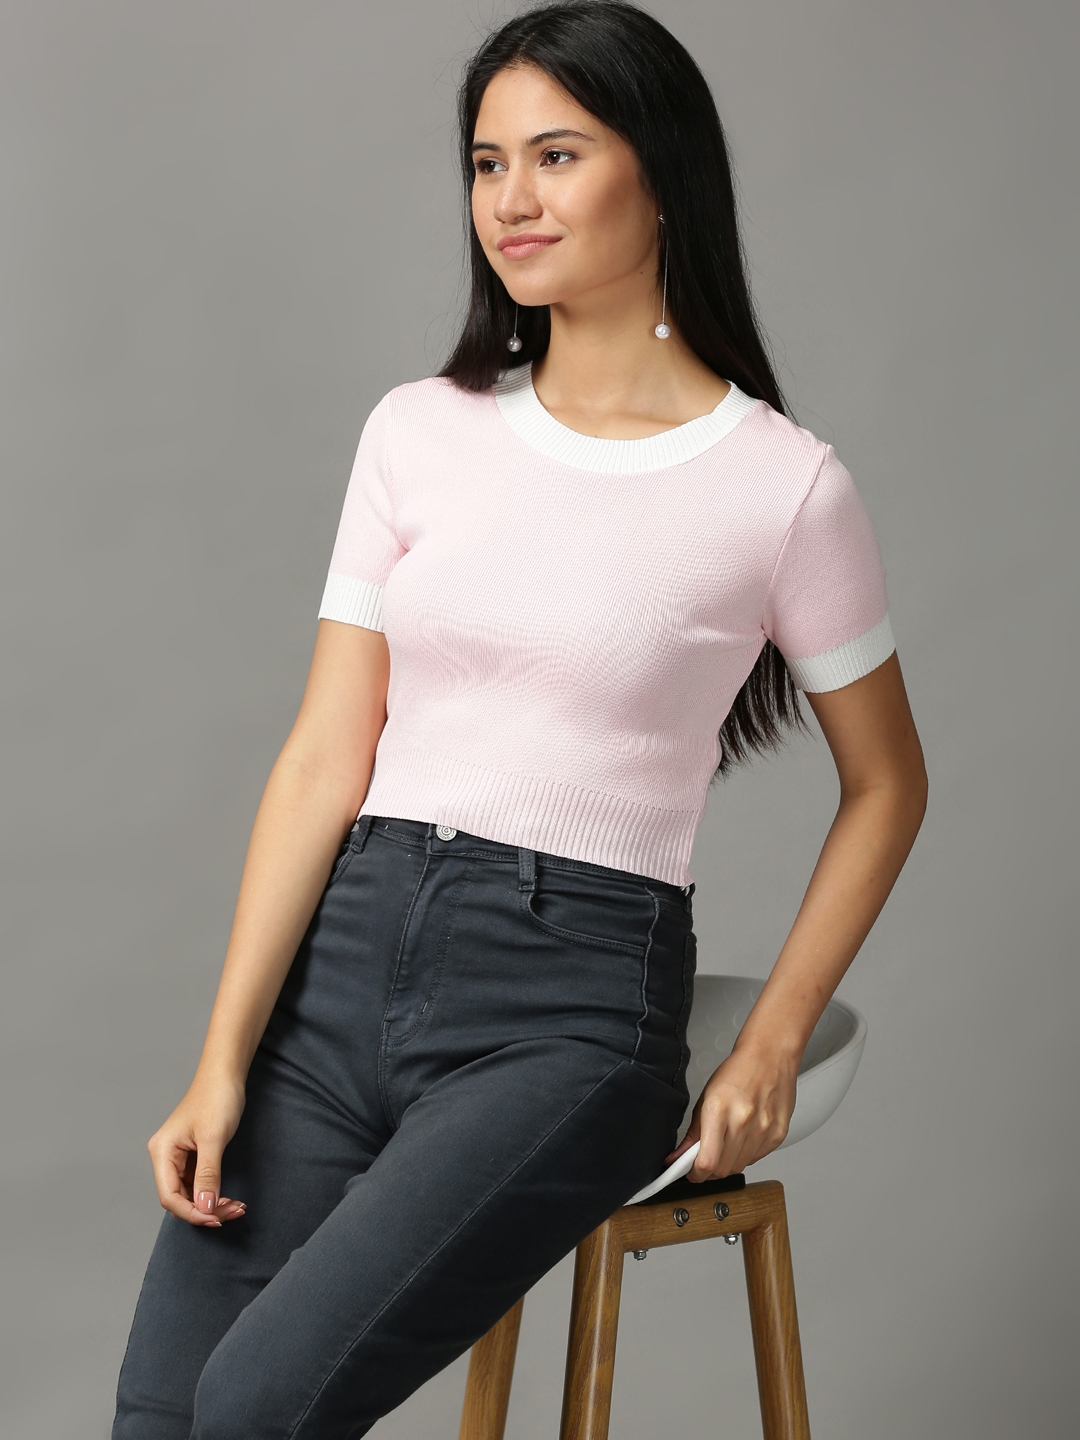 Women's Pink Acrylic Solid Tops